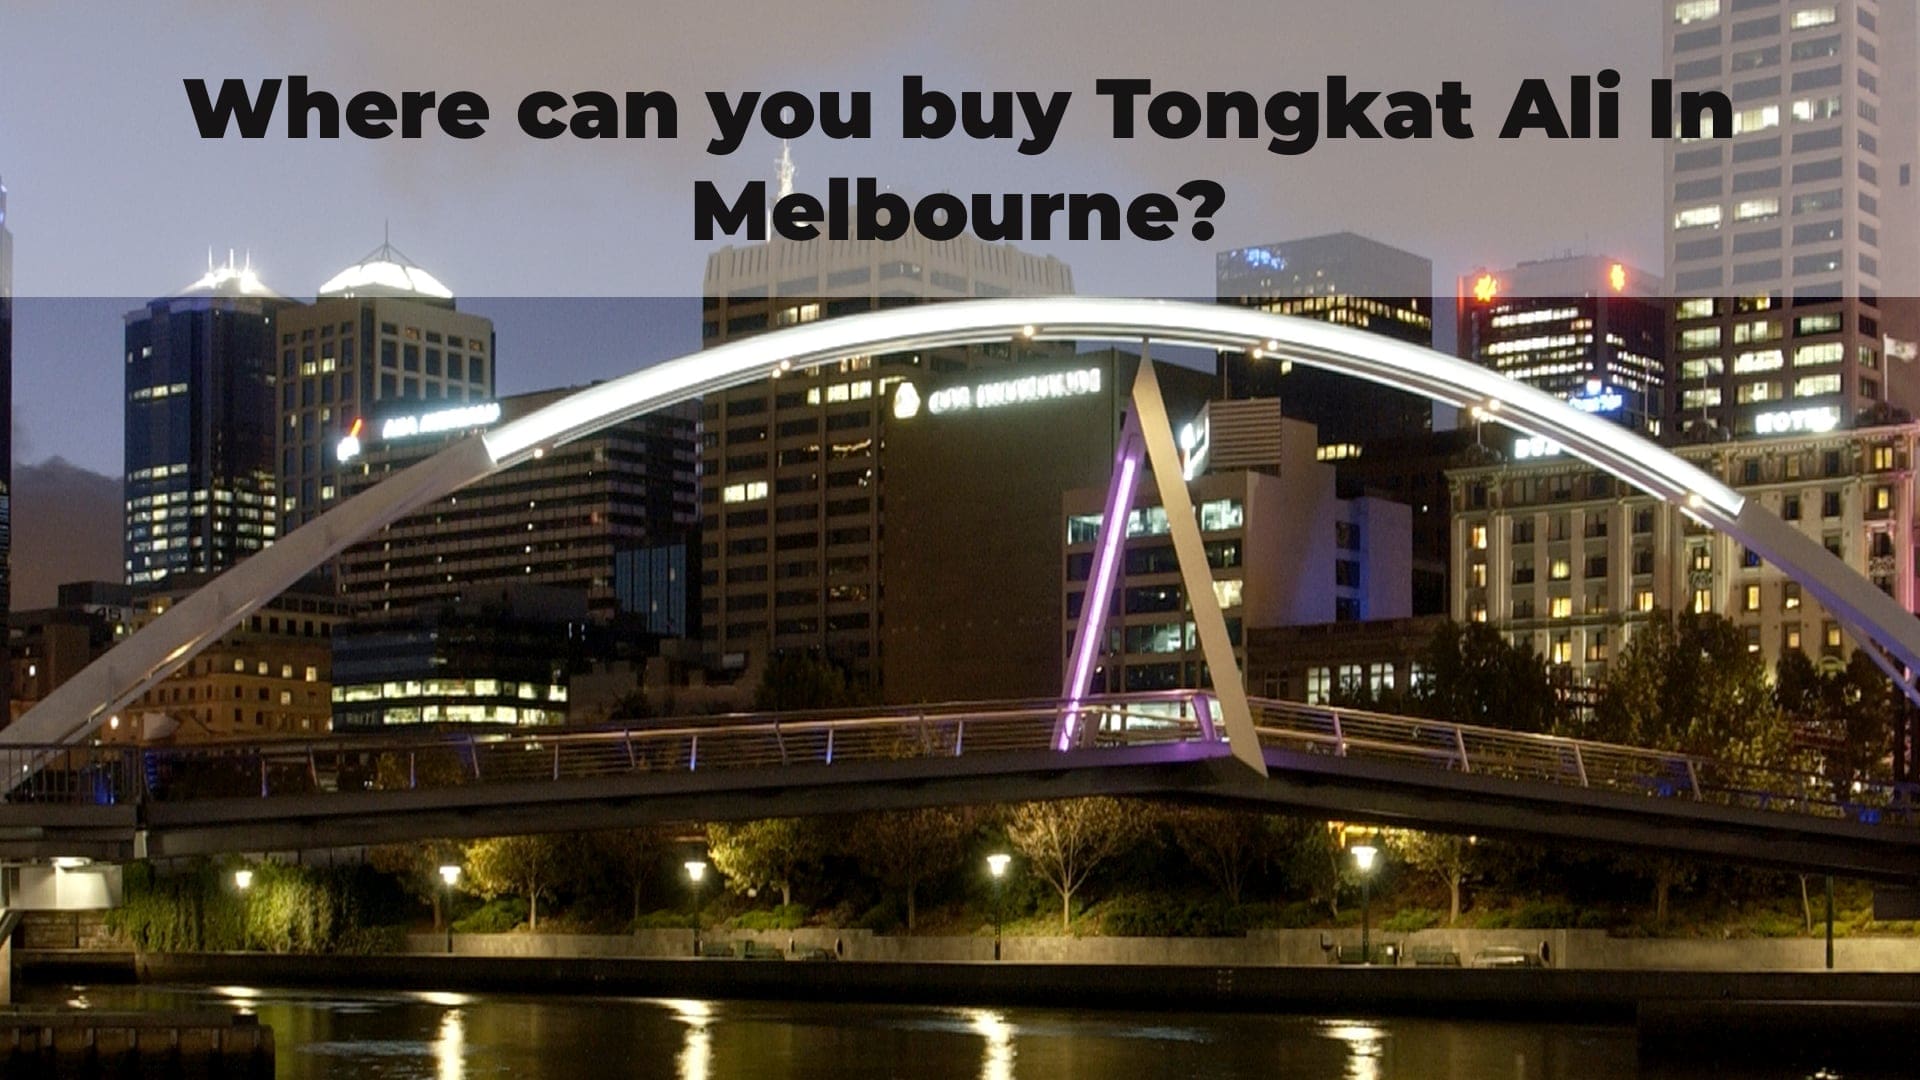 Article Cover For Where can you buy Tongkat Ali In Sydney Depicts A Bridge on The Yarra River